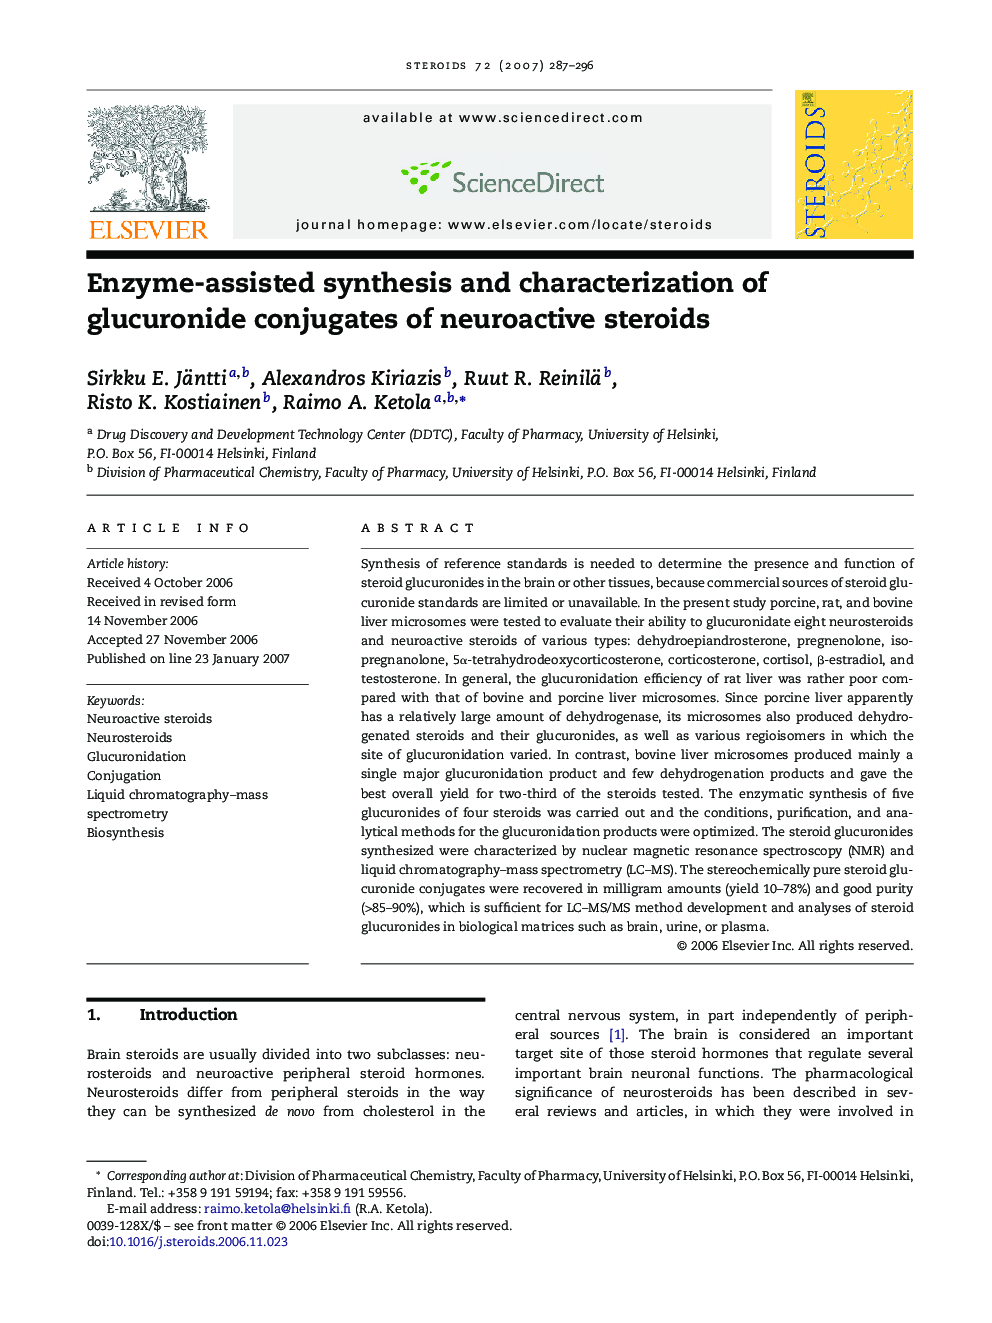 Enzyme-assisted synthesis and characterization of glucuronide conjugates of neuroactive steroids